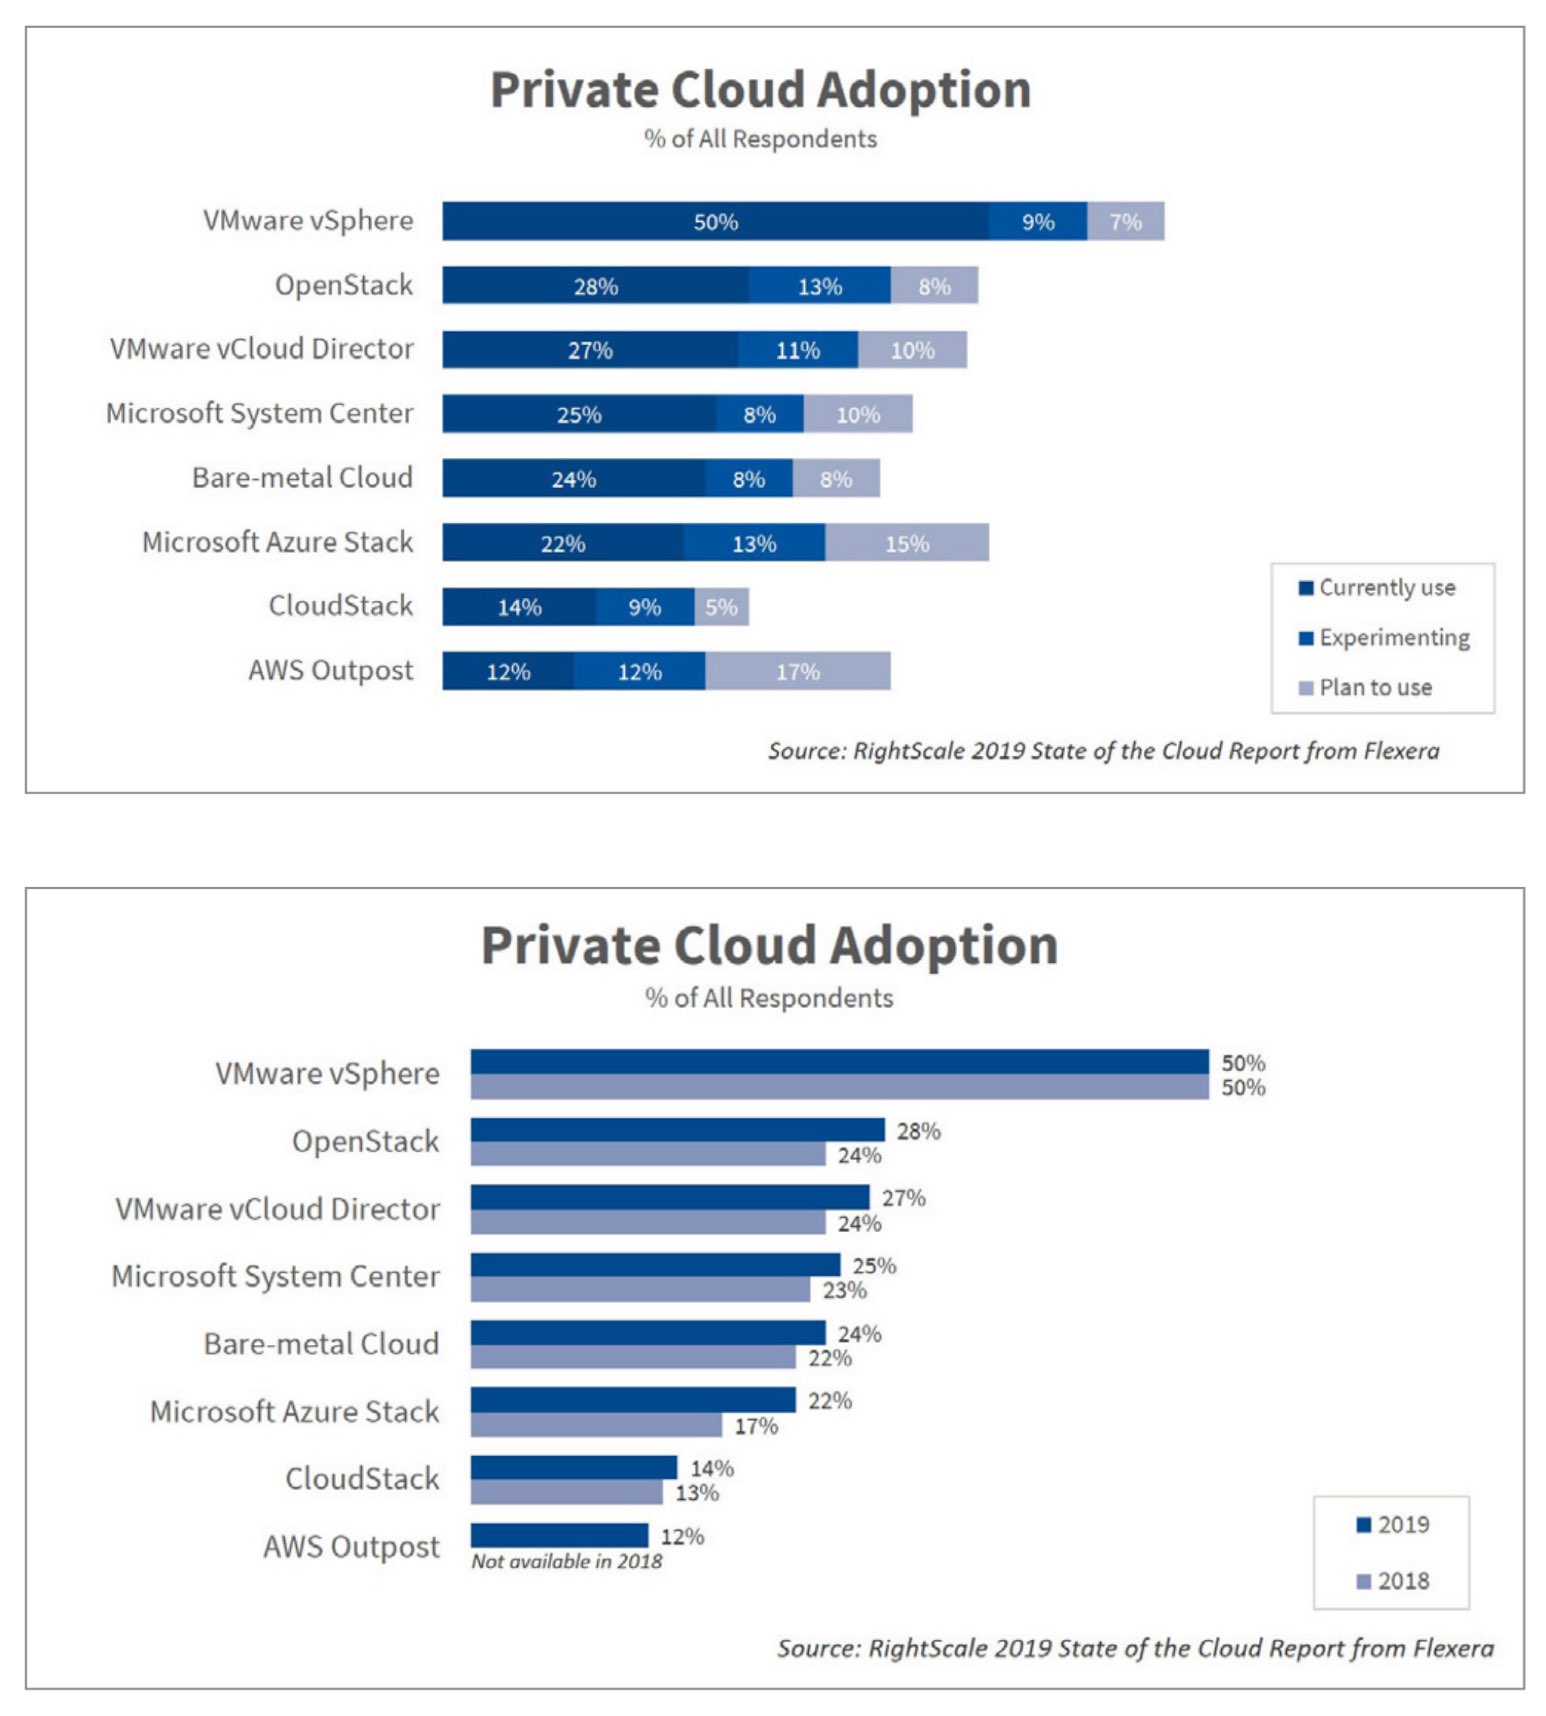 Private Cloud Adoption, RightScale 2019 State of the Cloud-Report from Flexera